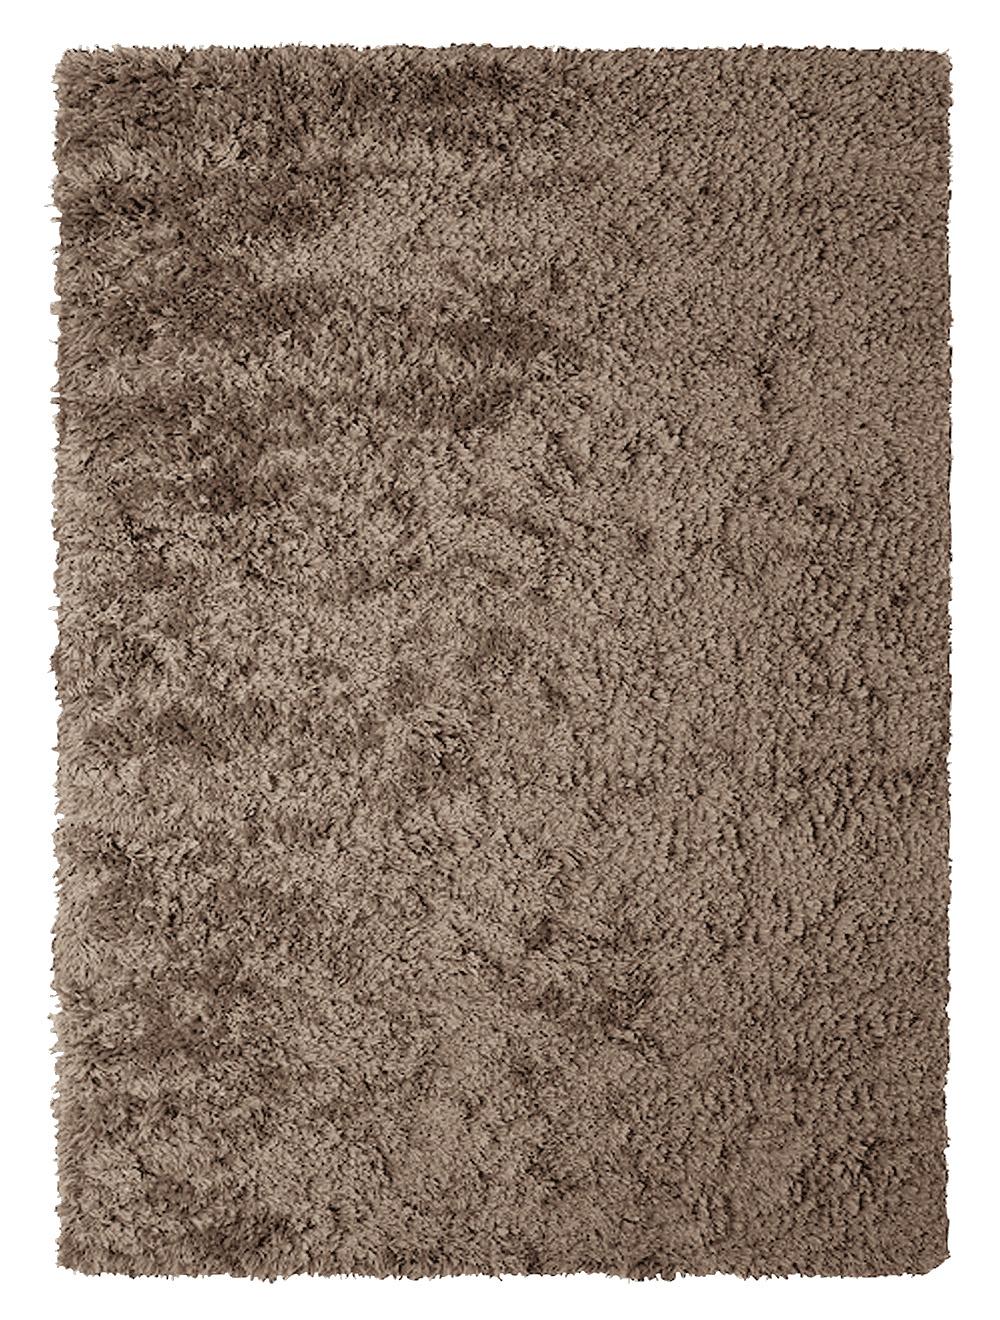 Nougat brown Rya carpet by Massimo Copenhagen.
Handwoven
Materials: 100% New Zealand wool.
Dimensions: W 200 x H 300 cm.
Available colors: Cream, charcoal, soft grey, and nougat brown.
Other dimensions are available: 140x200 cm, 170x240 cm, and